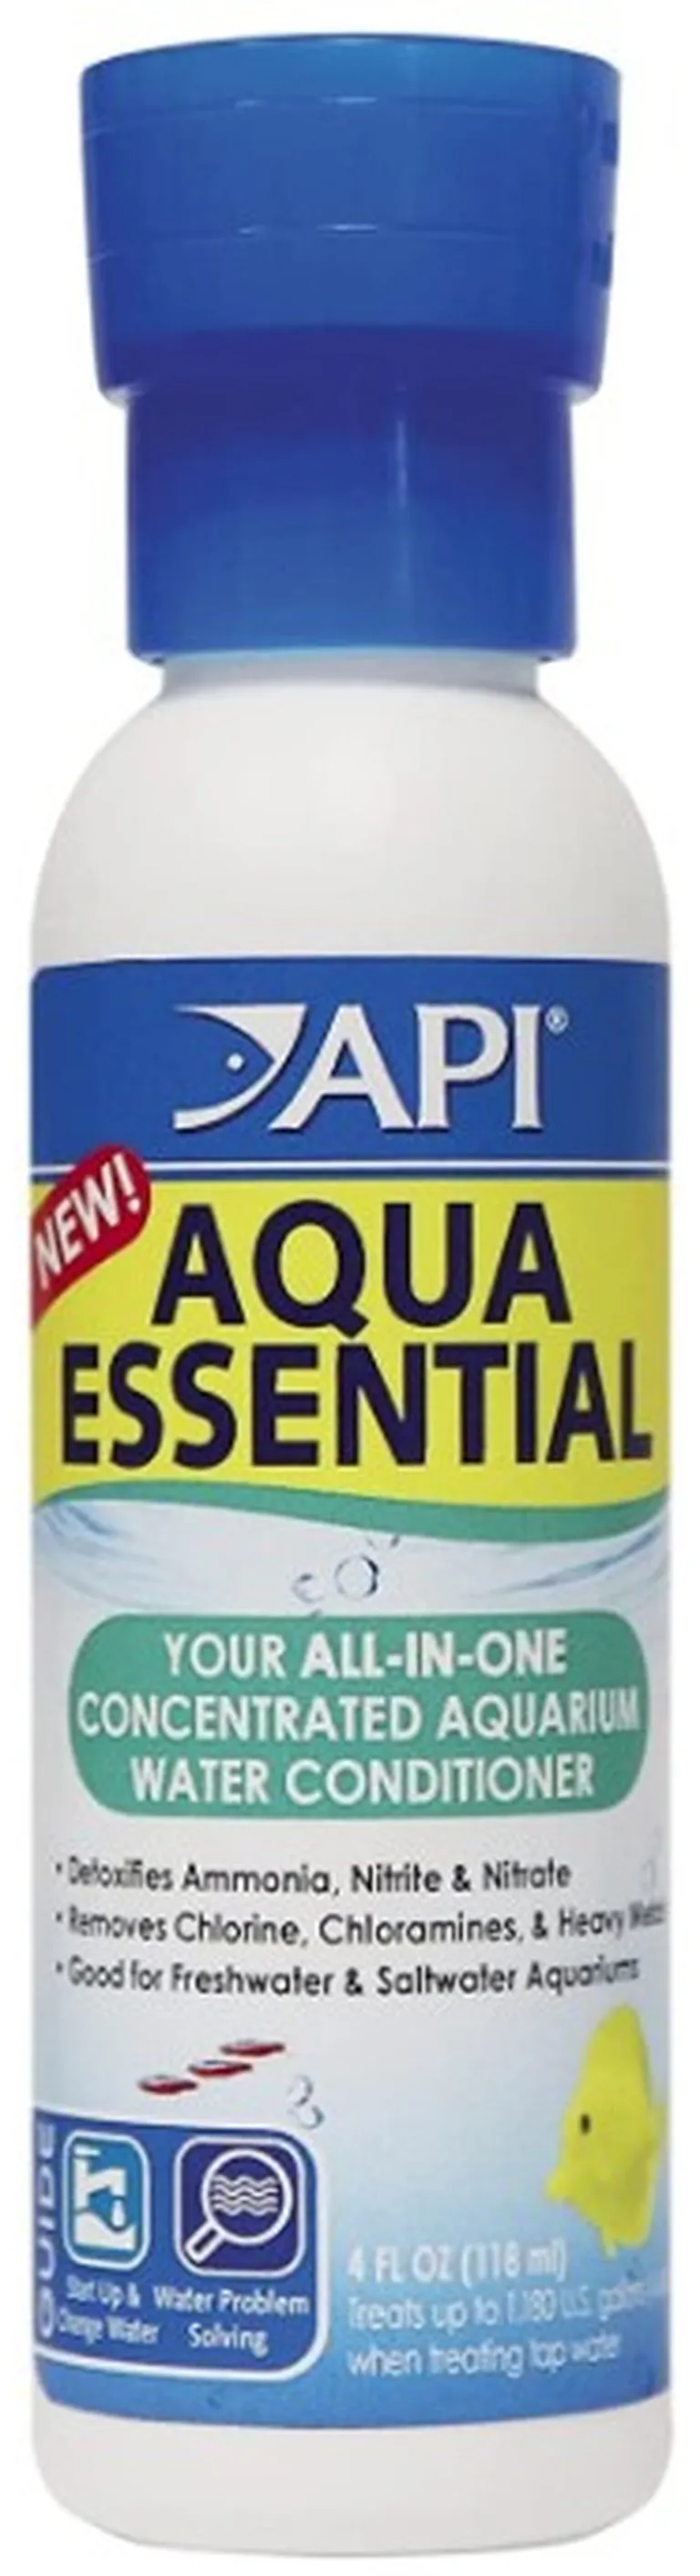 API Aqua Essential All-in-One Concentrated Water Conditioner Photo 1